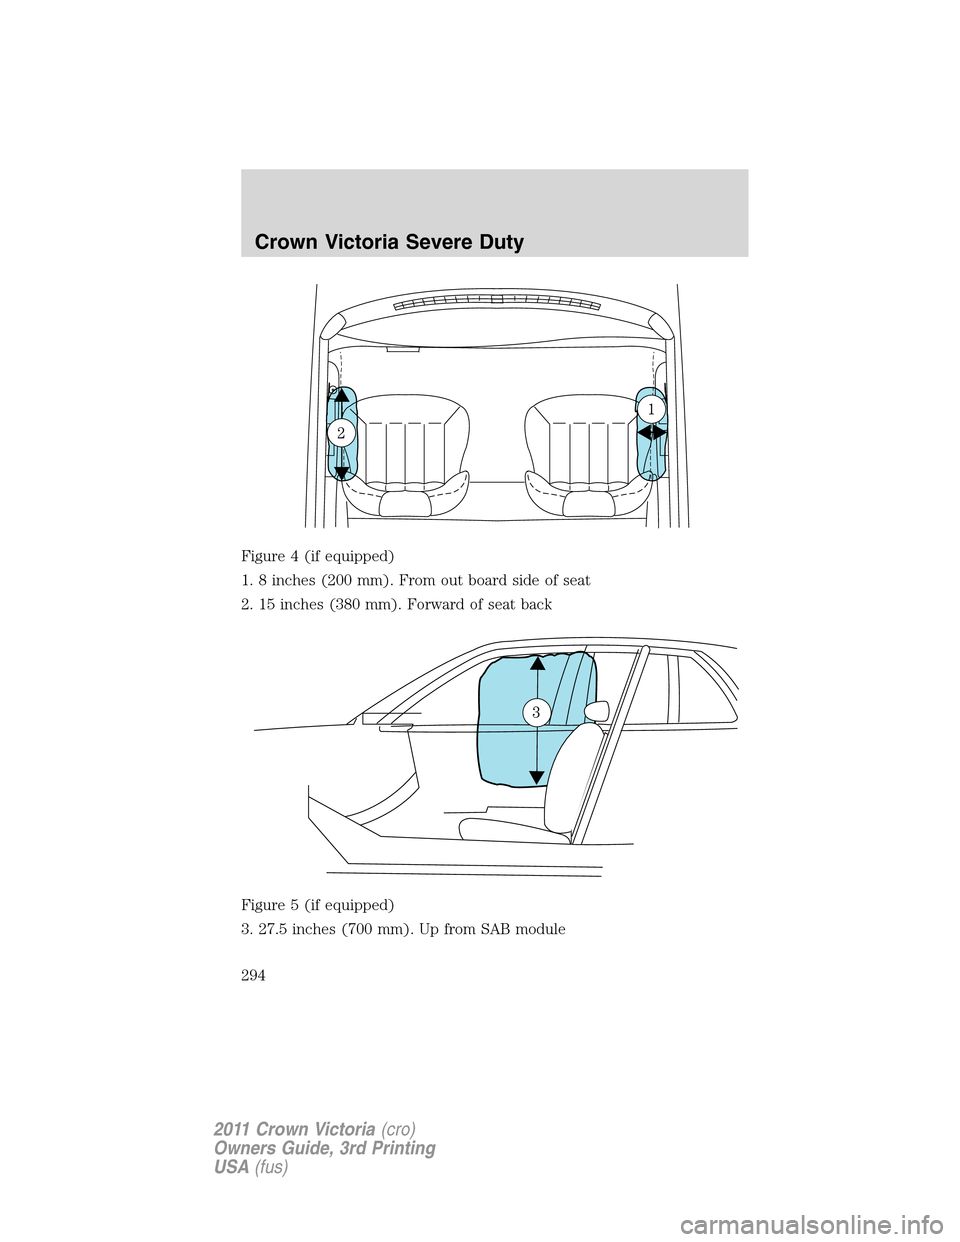 Mercury Grand Marquis 1011  Owners Manuals Figure 4 (if equipped)
1. 8 inches (200 mm). From out board side of seat
2. 15 inches (380 mm). Forward of seat back
Figure 5 (if equipped)
3. 27.5 inches (700 mm). Up from SAB module
Crown Victoria S